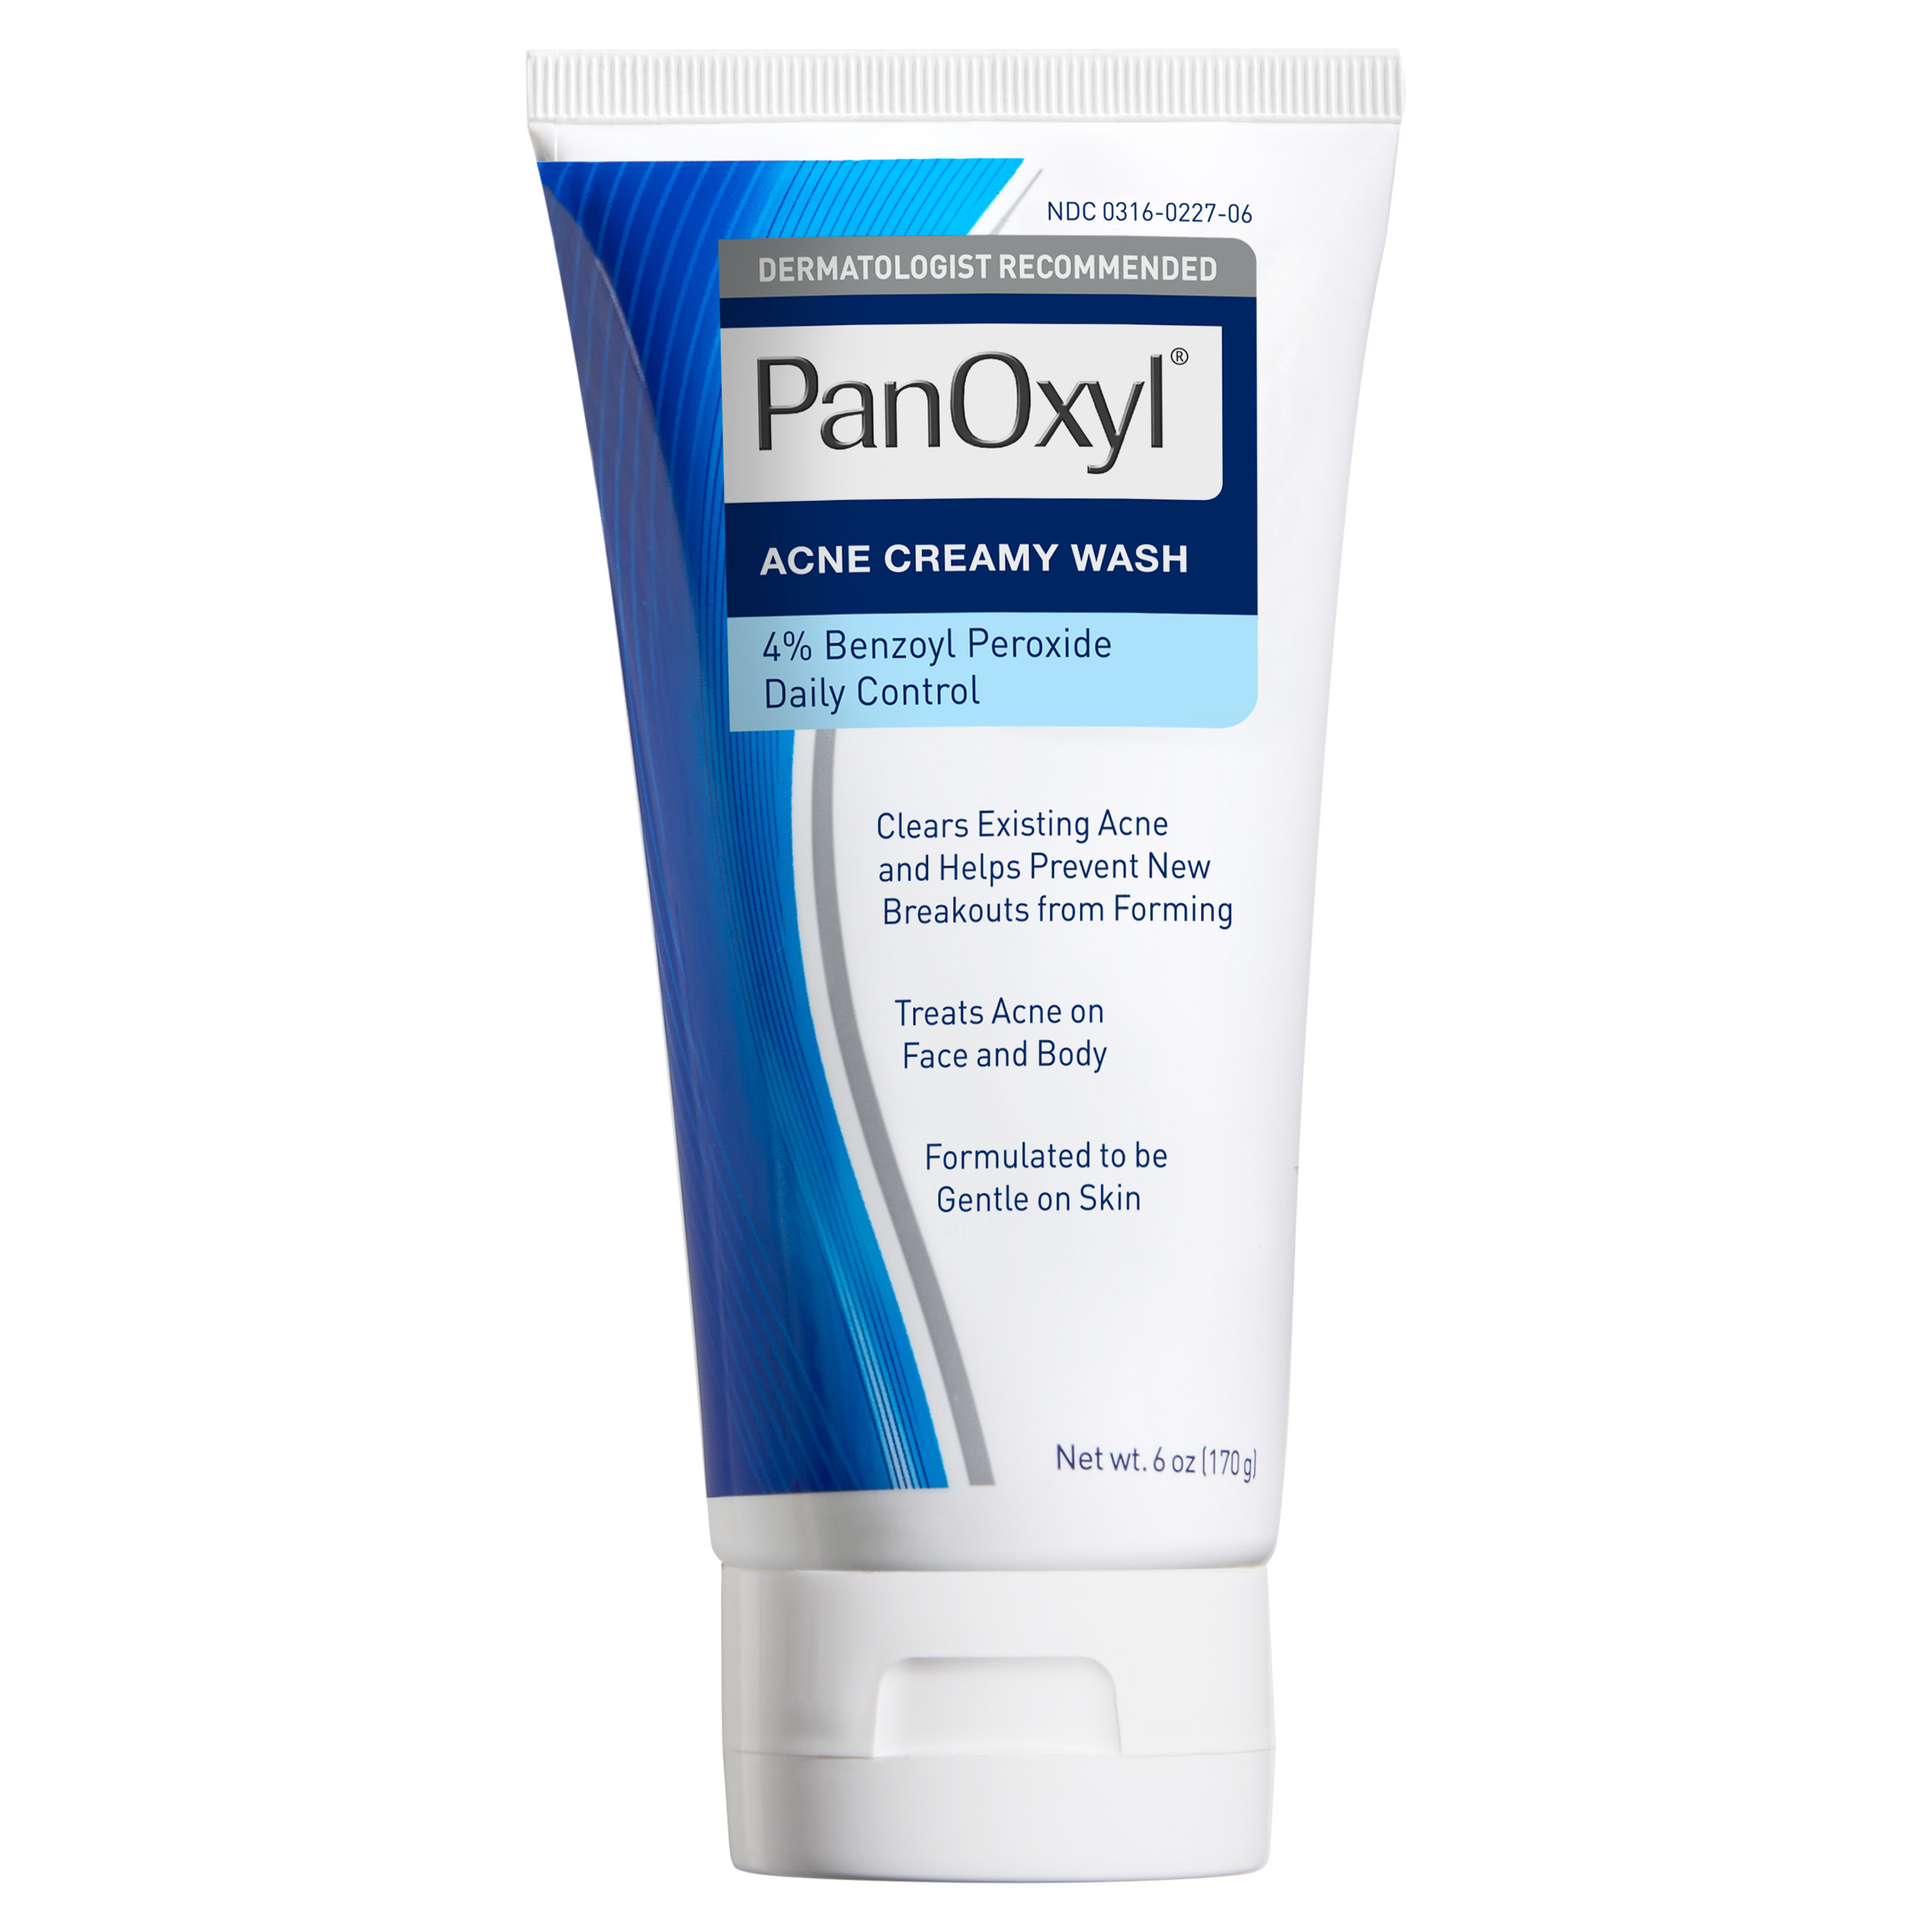 PanOxyl Acne Creamy Wash Daily Control, Face & Body, 4% Benzoyl Peroxide, All Skin Types, 6 oz - image 1 of 13